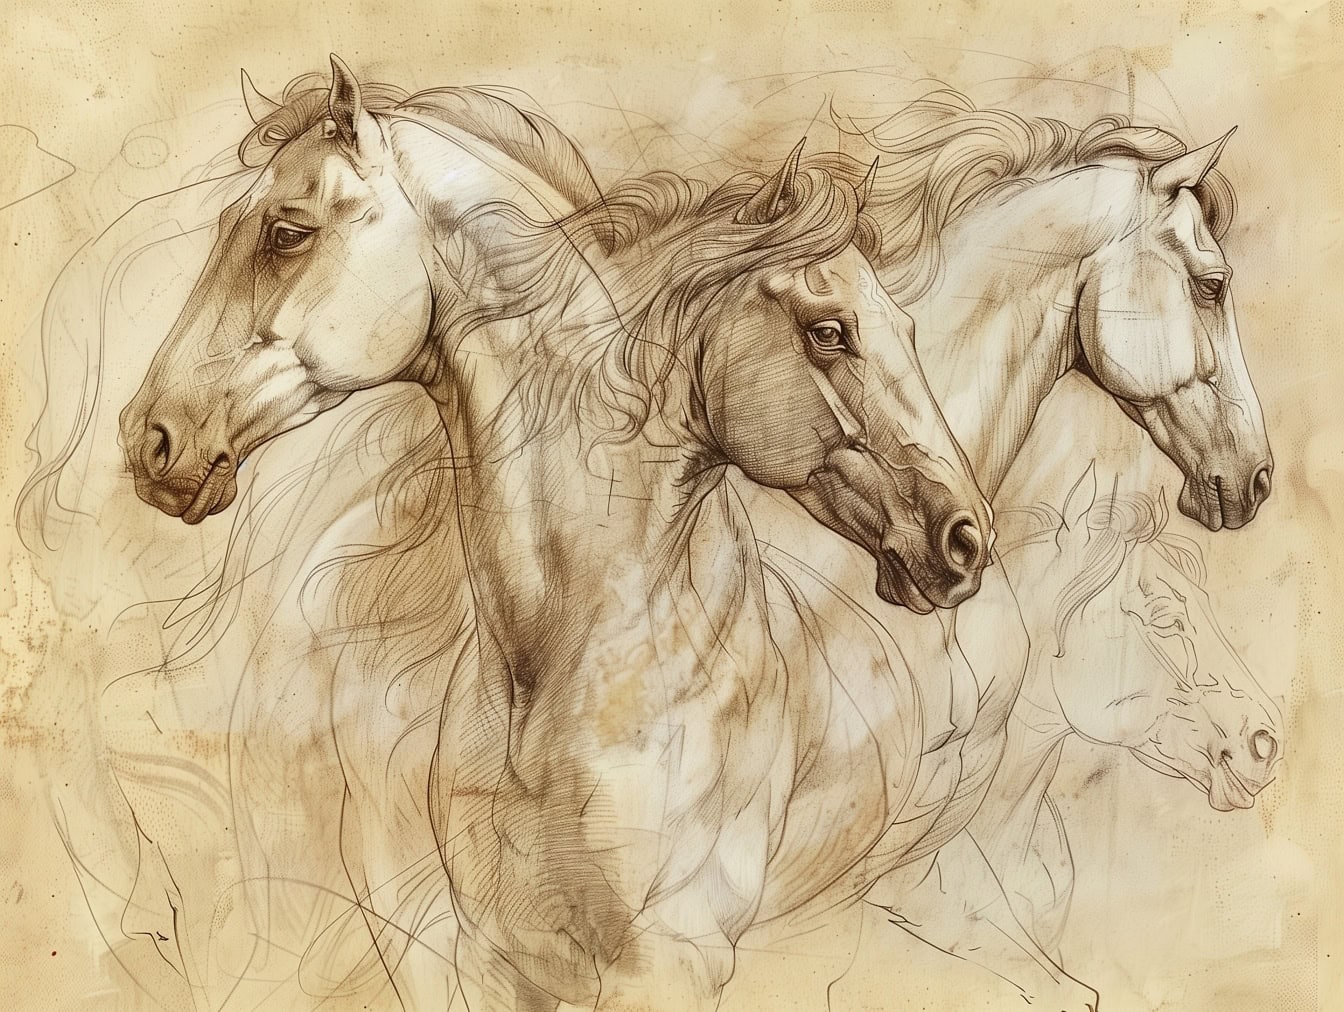 An unfinished working sketch drawing of several horses on faded yellowish brown paper, reminiscent of the artwork of a medieval artist